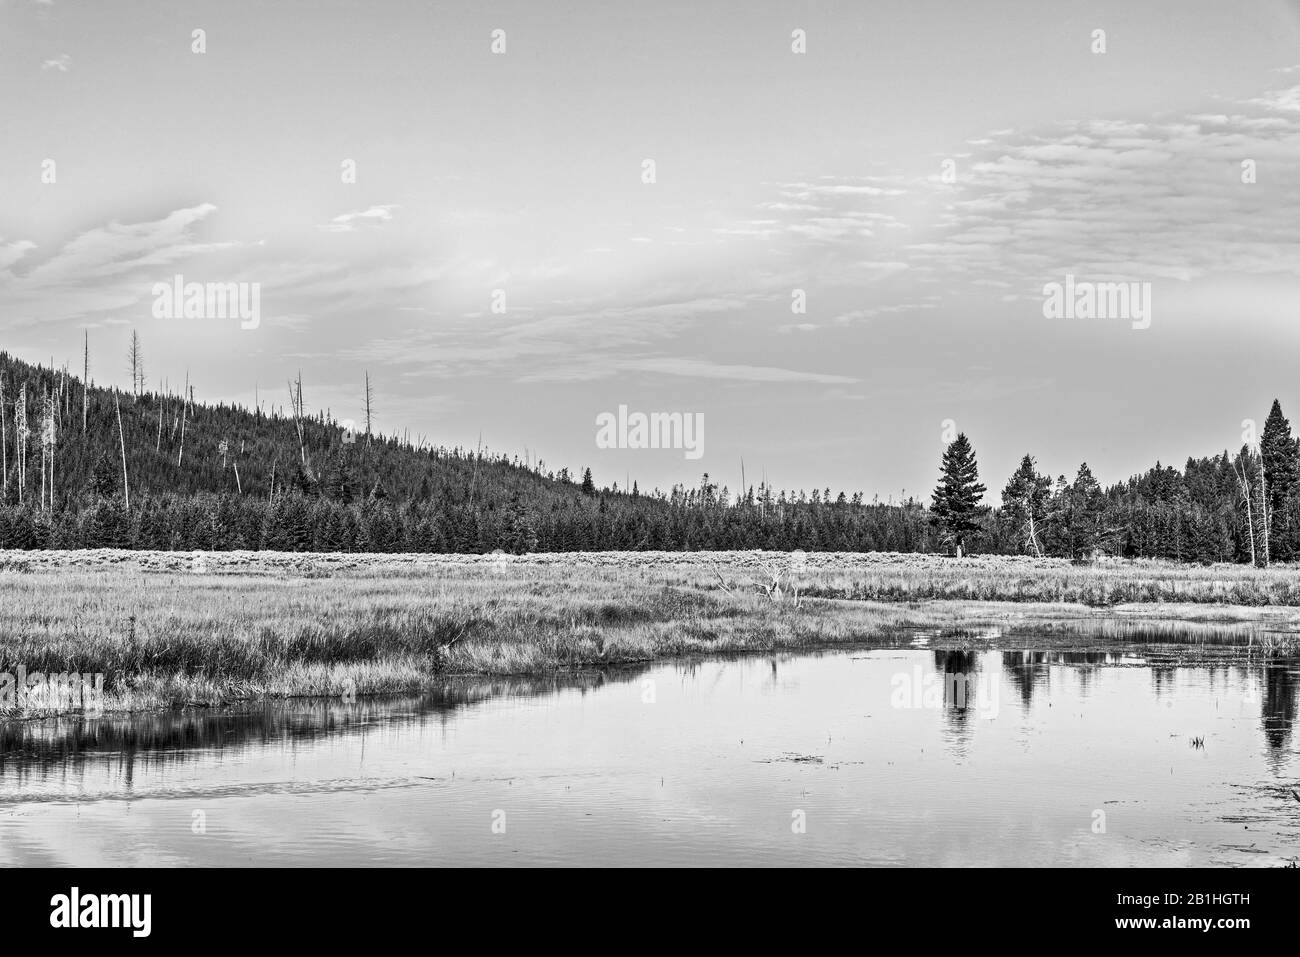 Calm lake reflecting the sky and trees, grassy valley with forest. Stock Photo